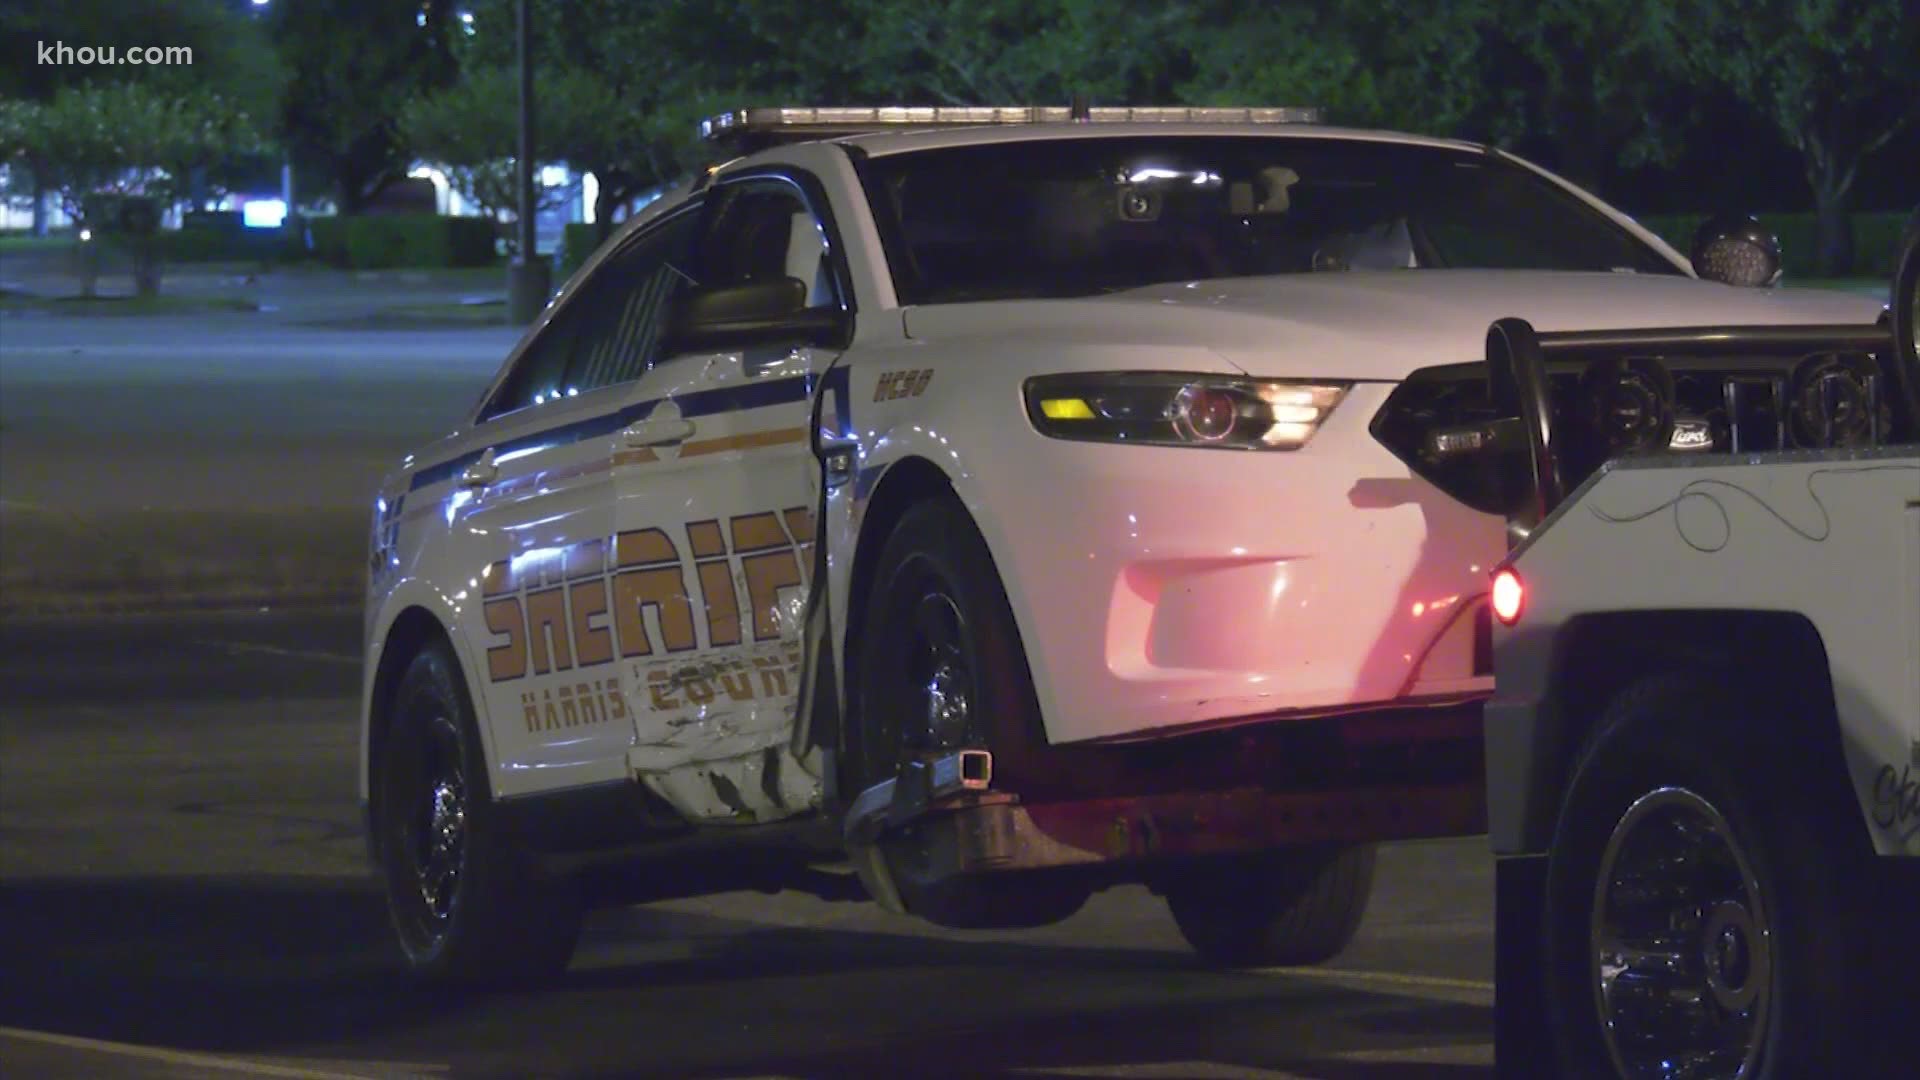 A Harris County Sheriff's Office deputy was taken to the hospital for a leg injury and cuts to his face after he was involved in a crash during a chase.